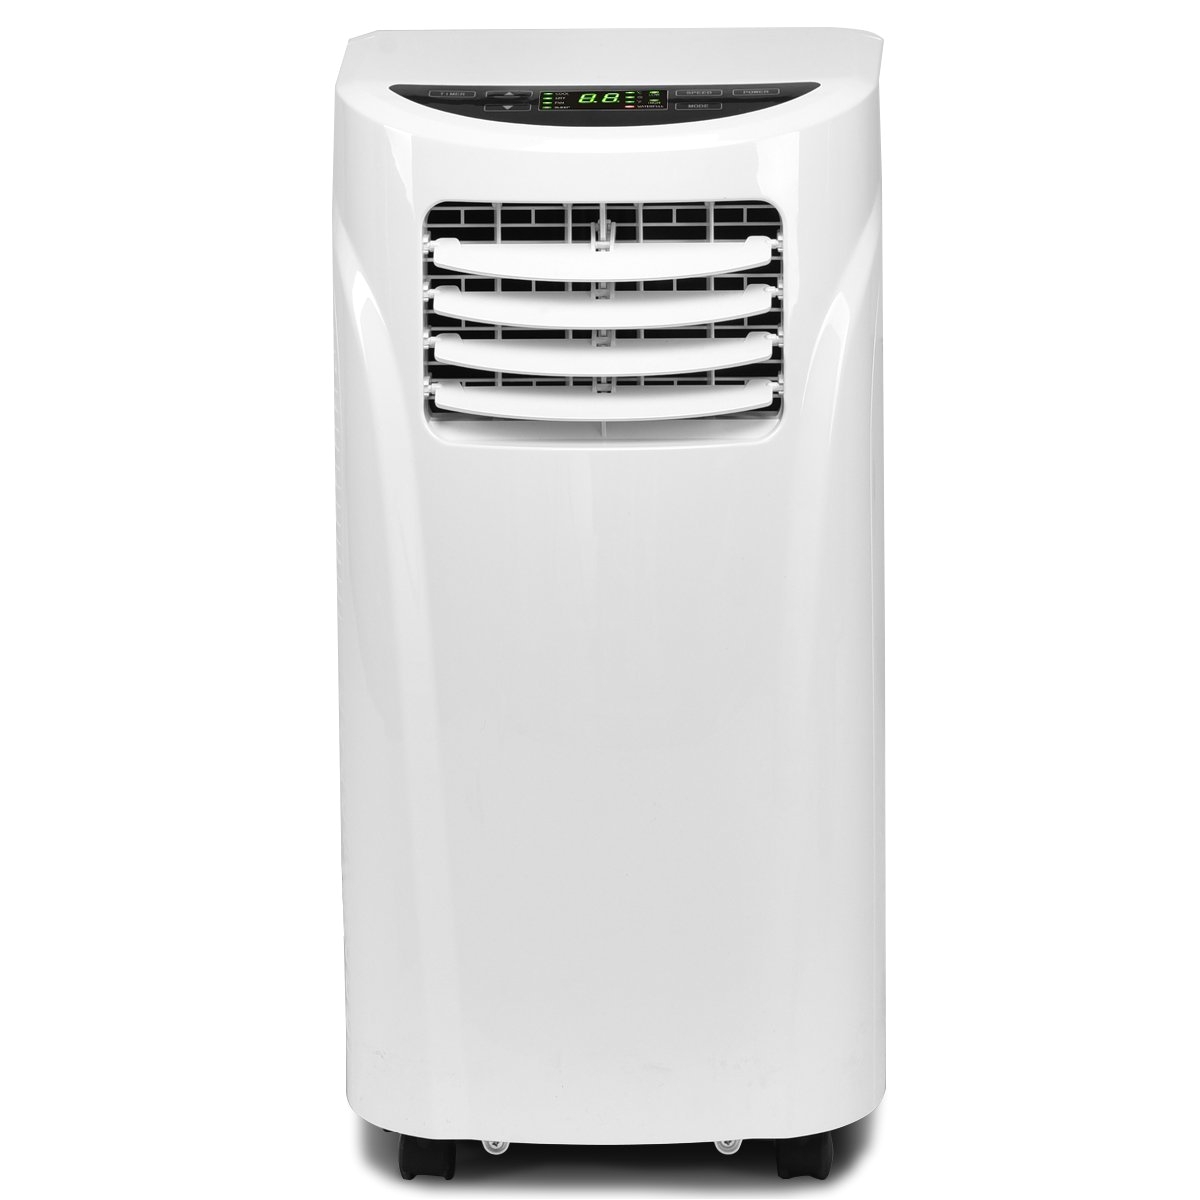 Ac Unit for 3 Bedroom House Amazon Com Costway 10 000 Btu Portable Air Conditioner with Remote